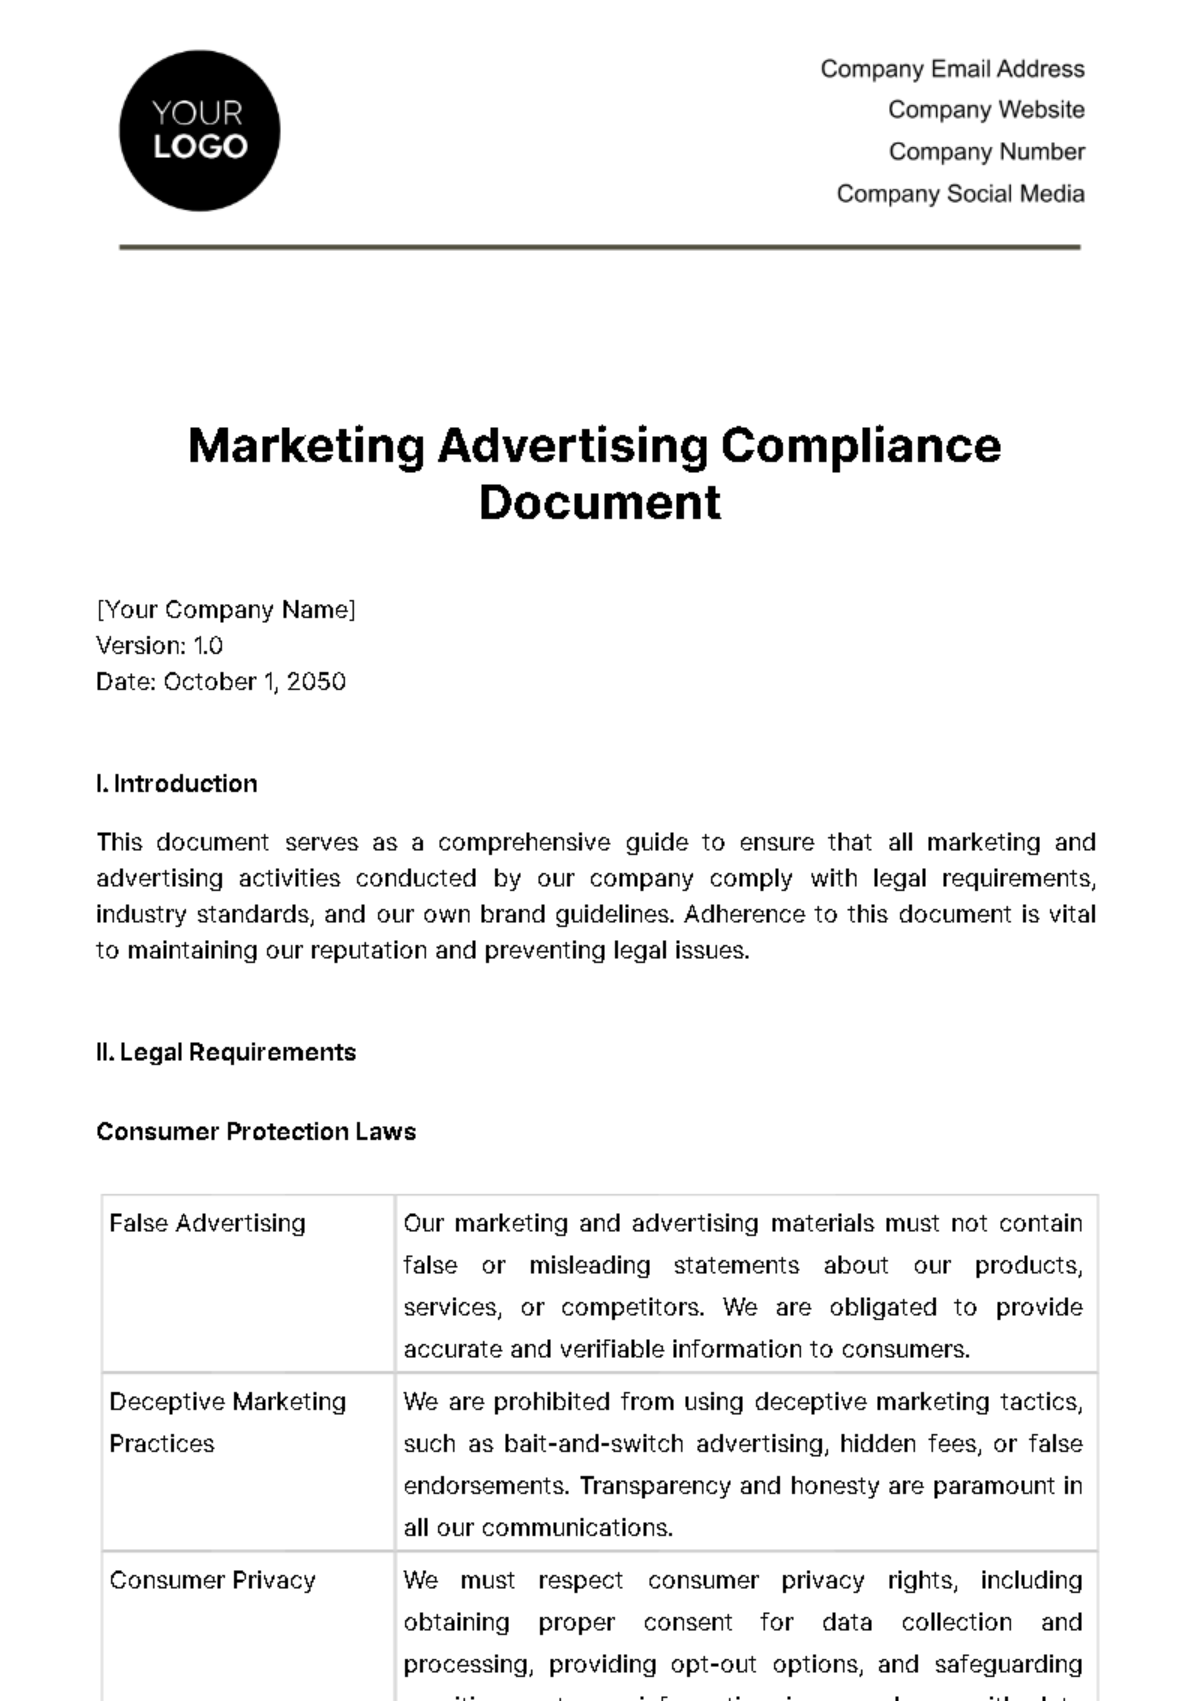 Free Marketing Advertising Compliance Document Template